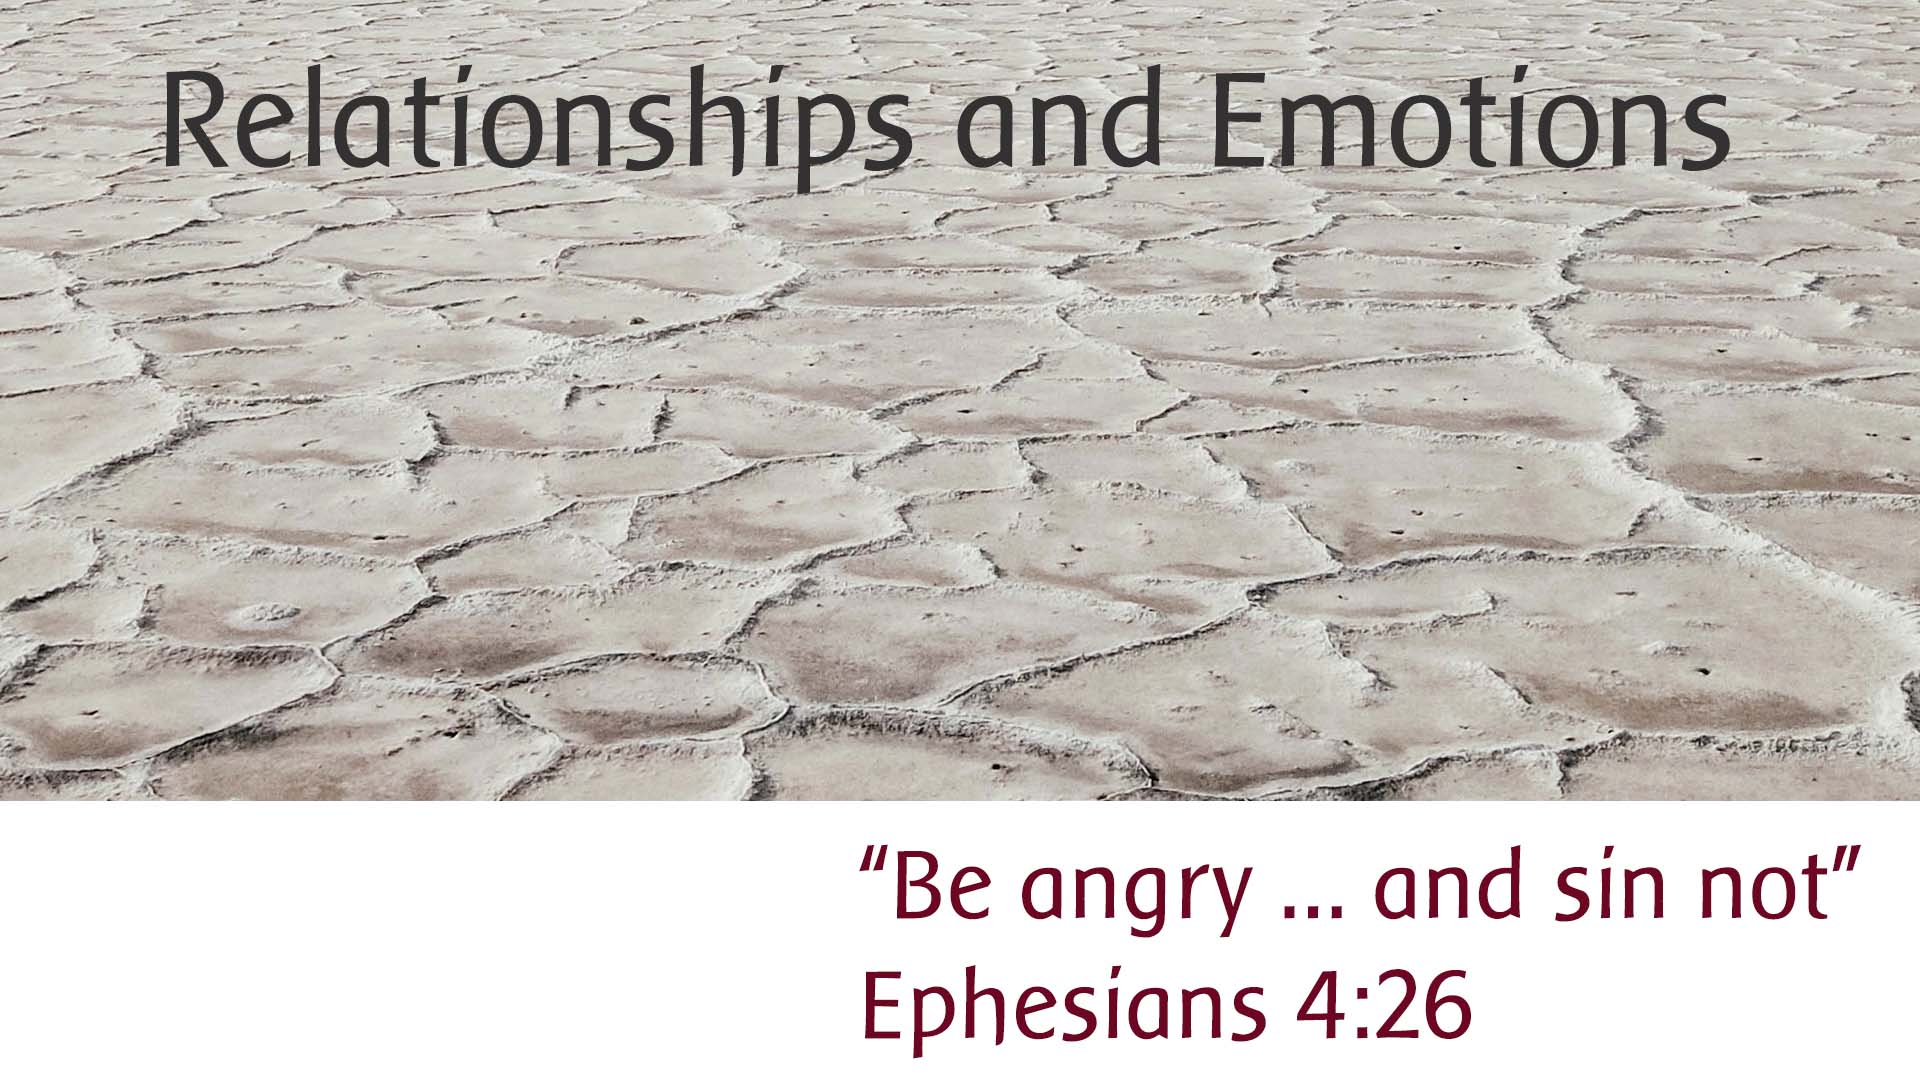 Be angry – but sin not